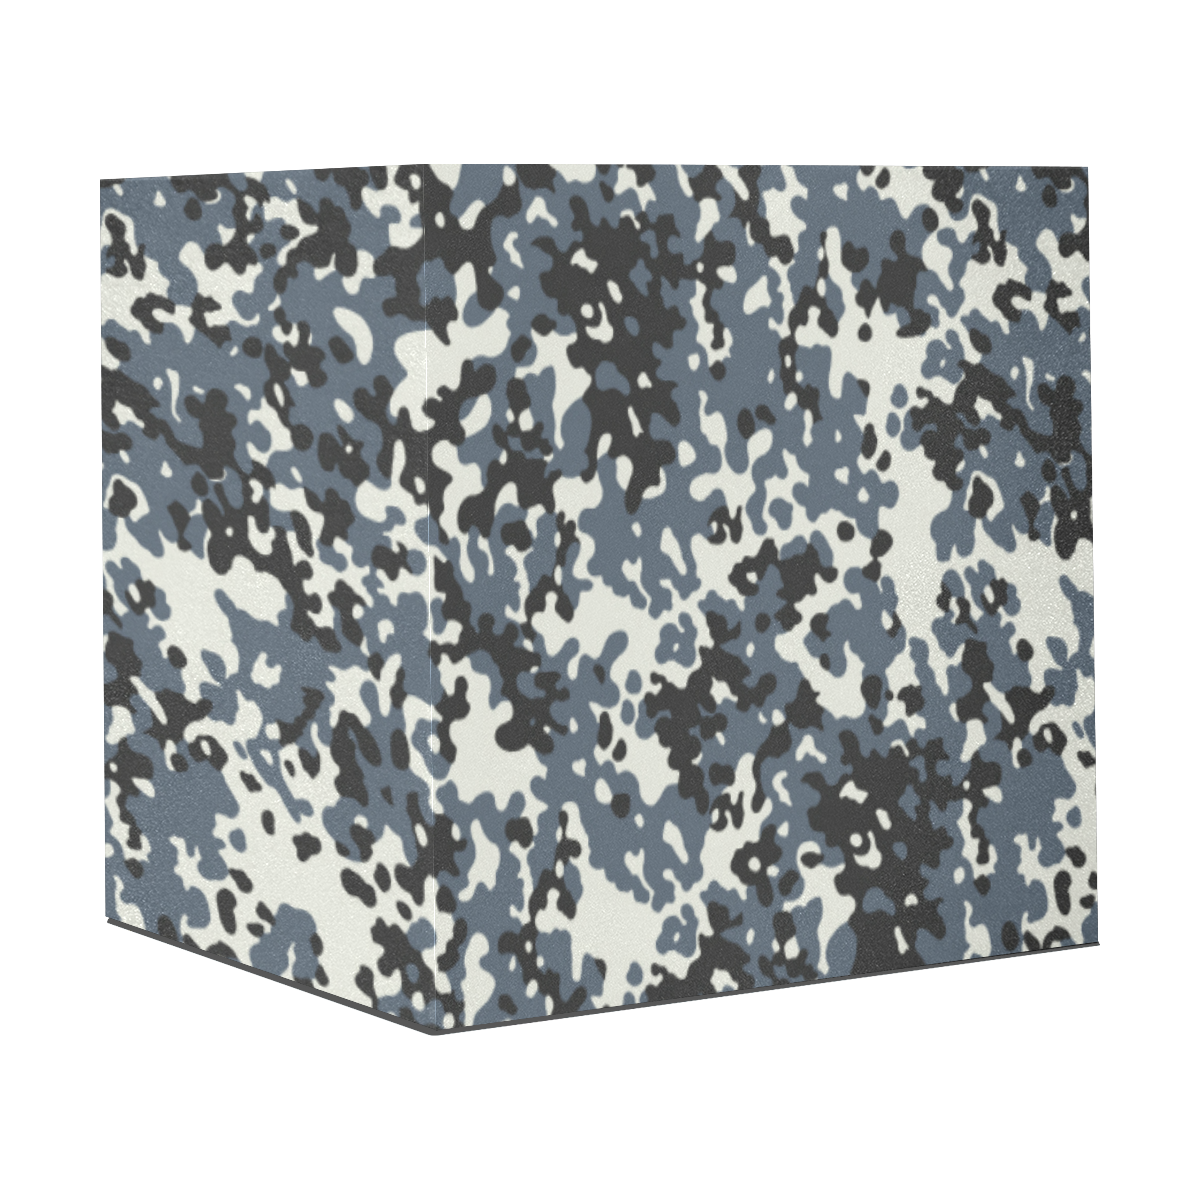 Urban City Black/Gray Digital Camouflage Gift Wrapping Paper 58"x 23" (1 Roll)